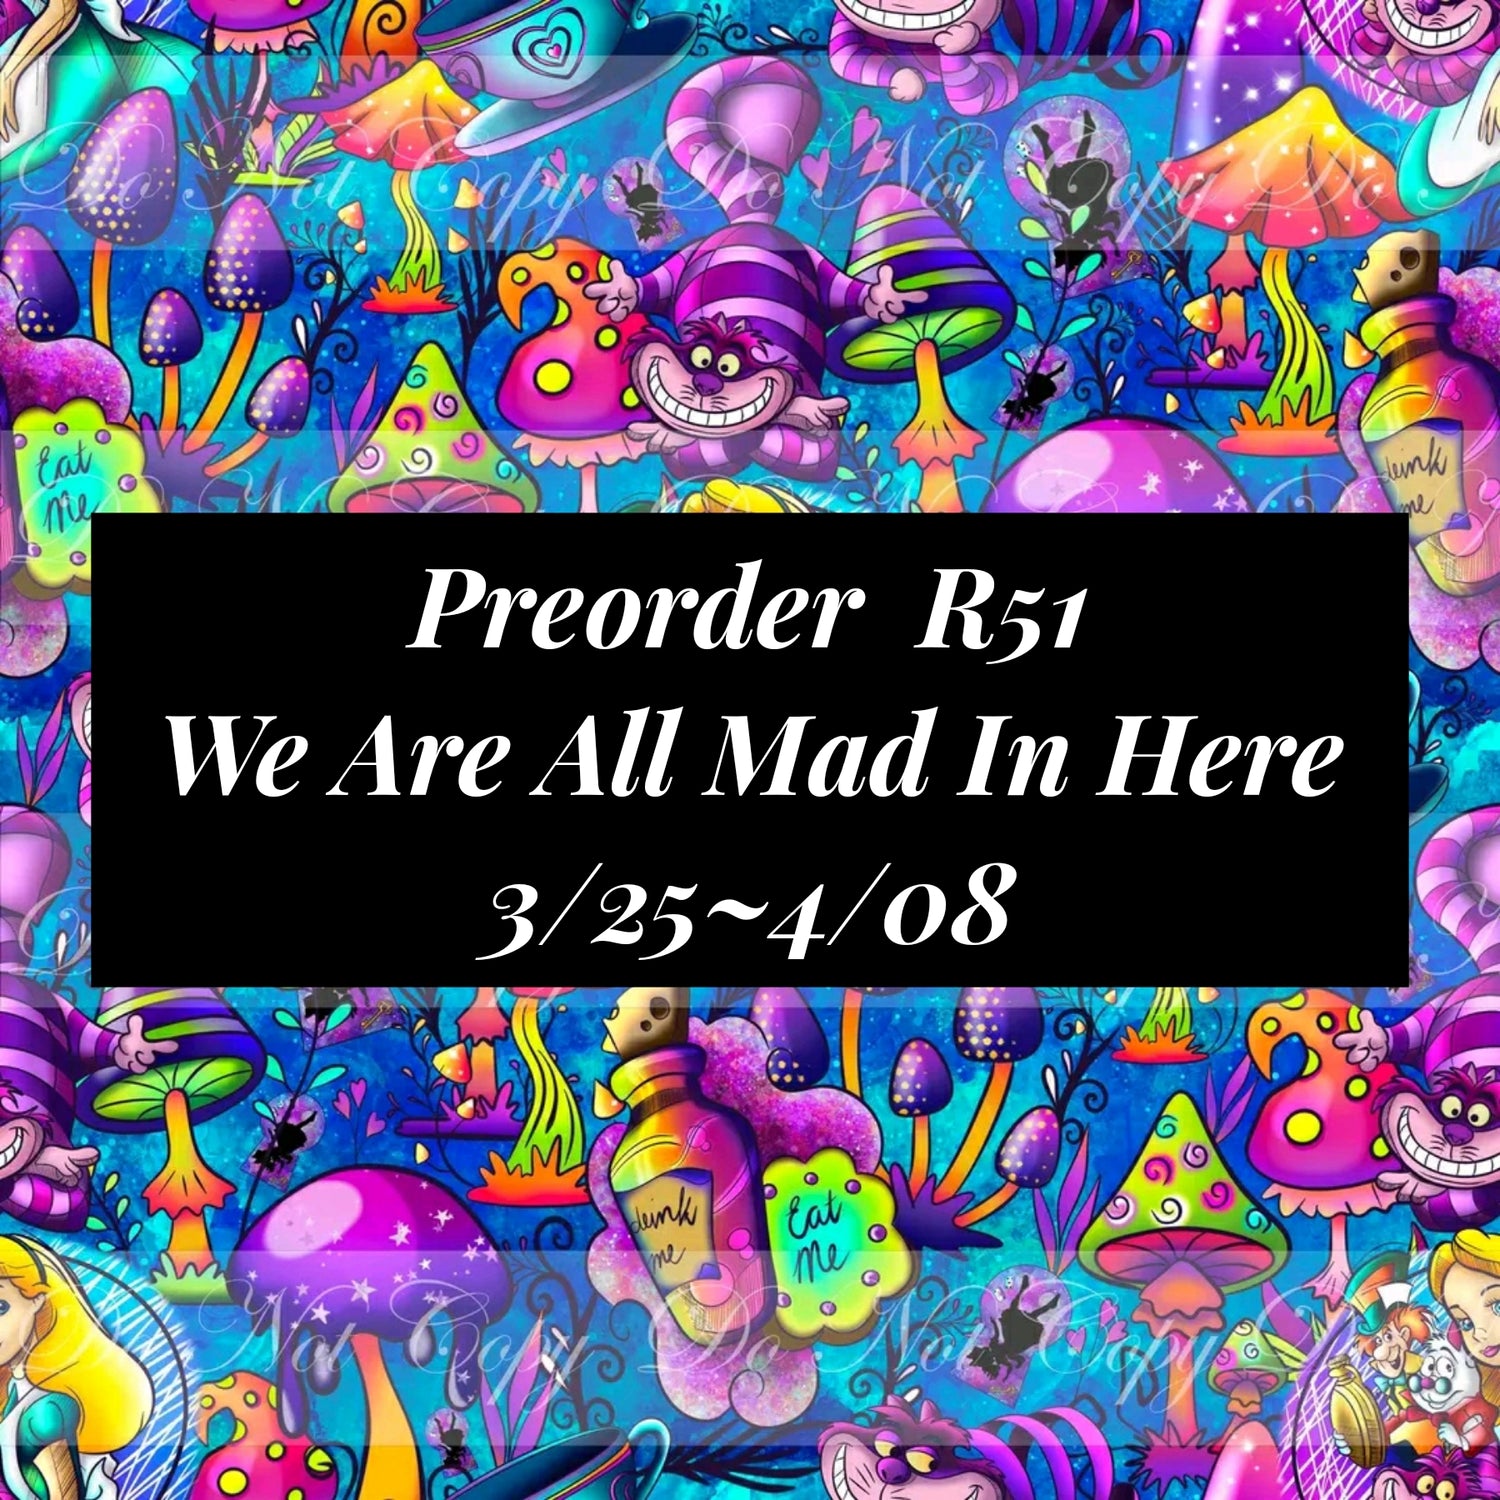 Preorder R51 We Are All Mad In Here